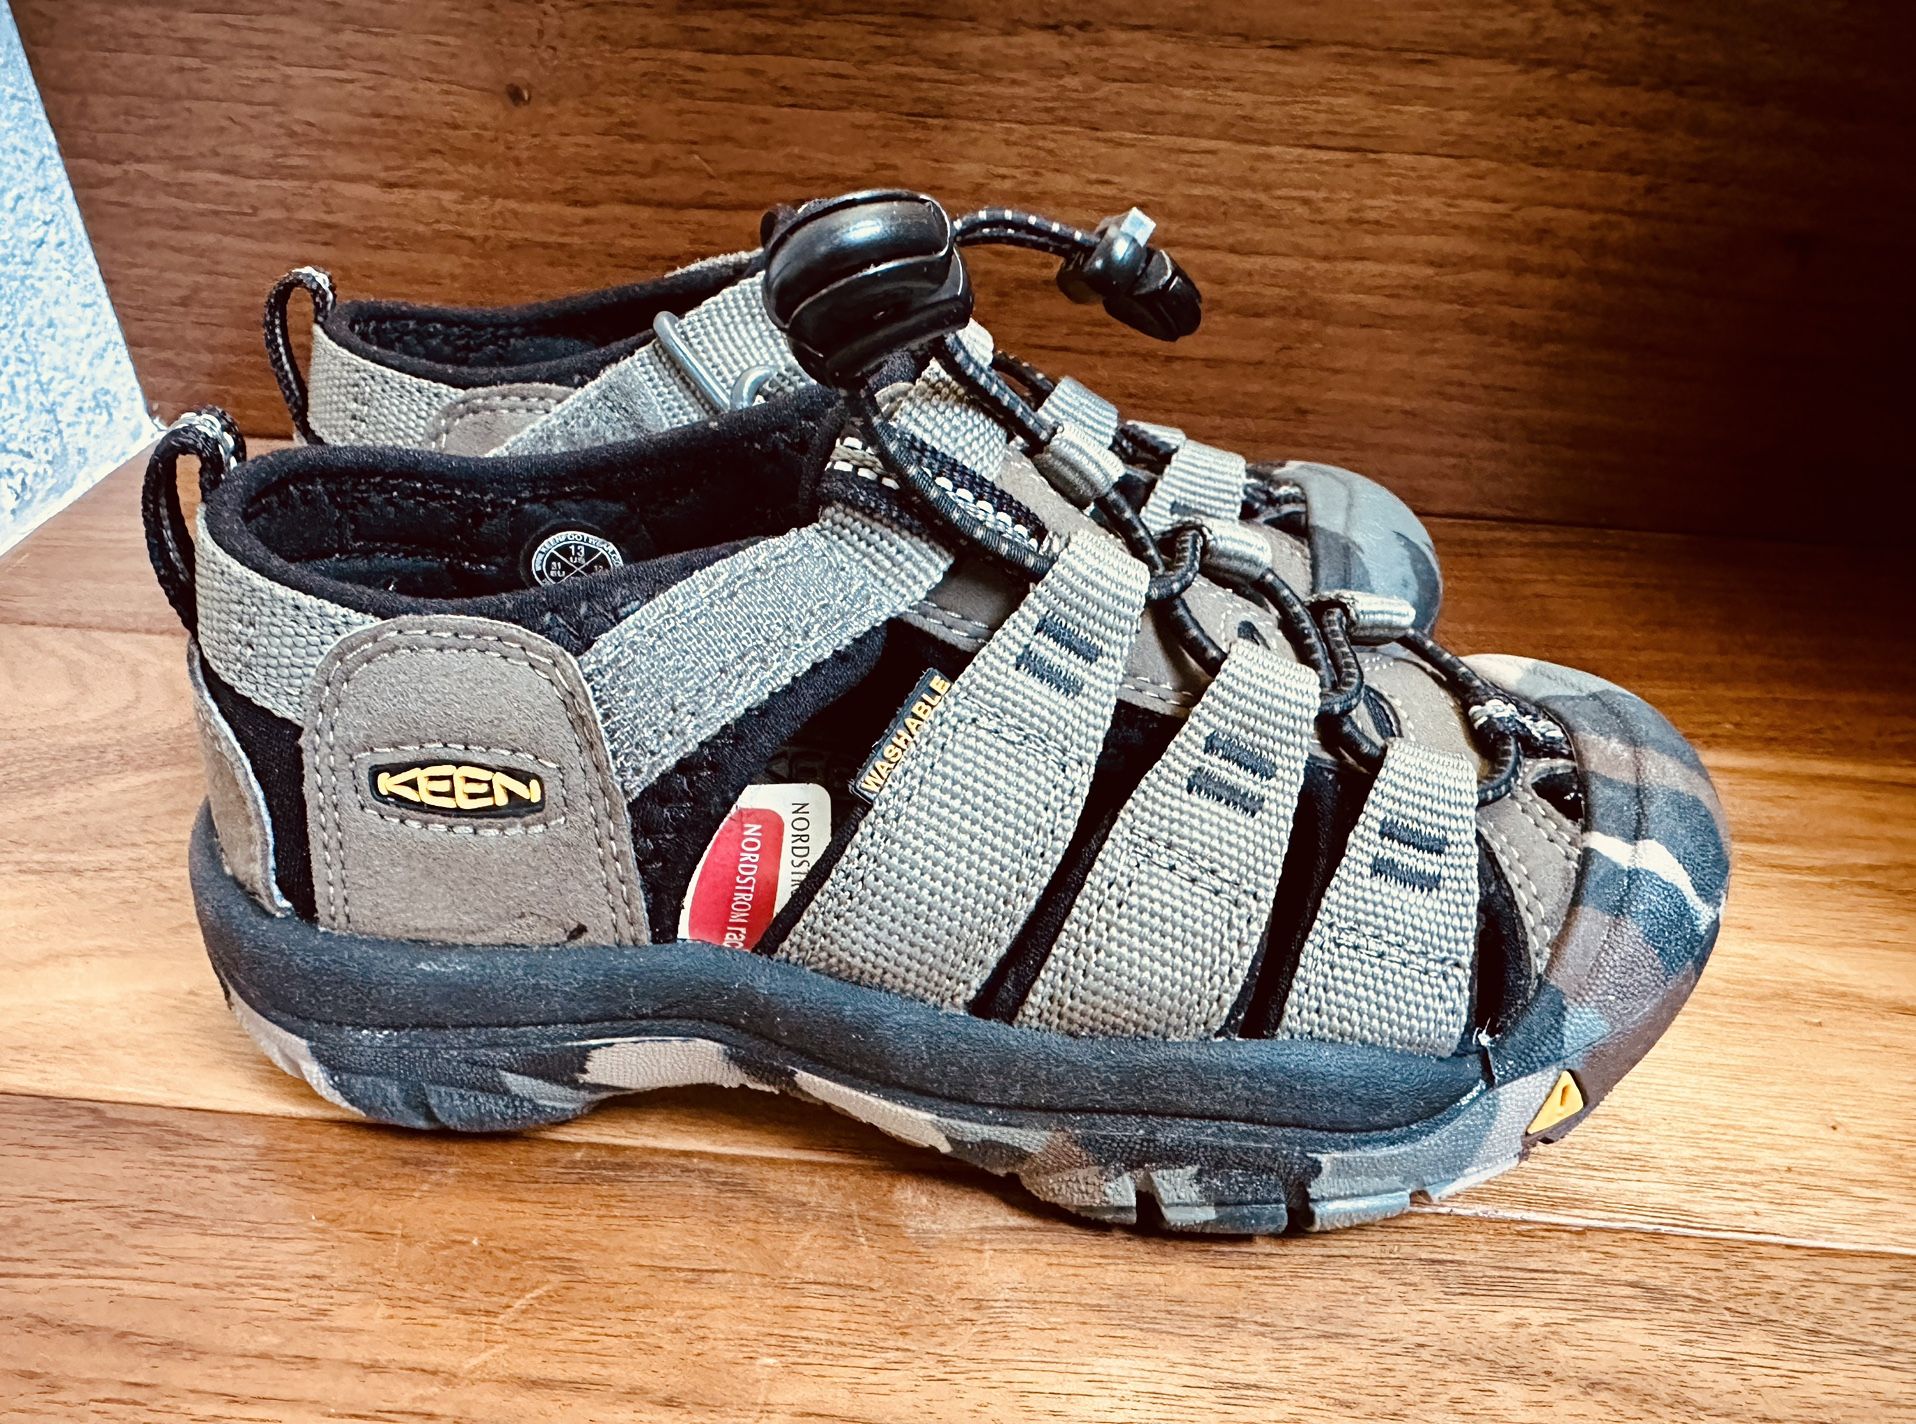 Brand New Keen Boys Shoes Size 13 Sandal